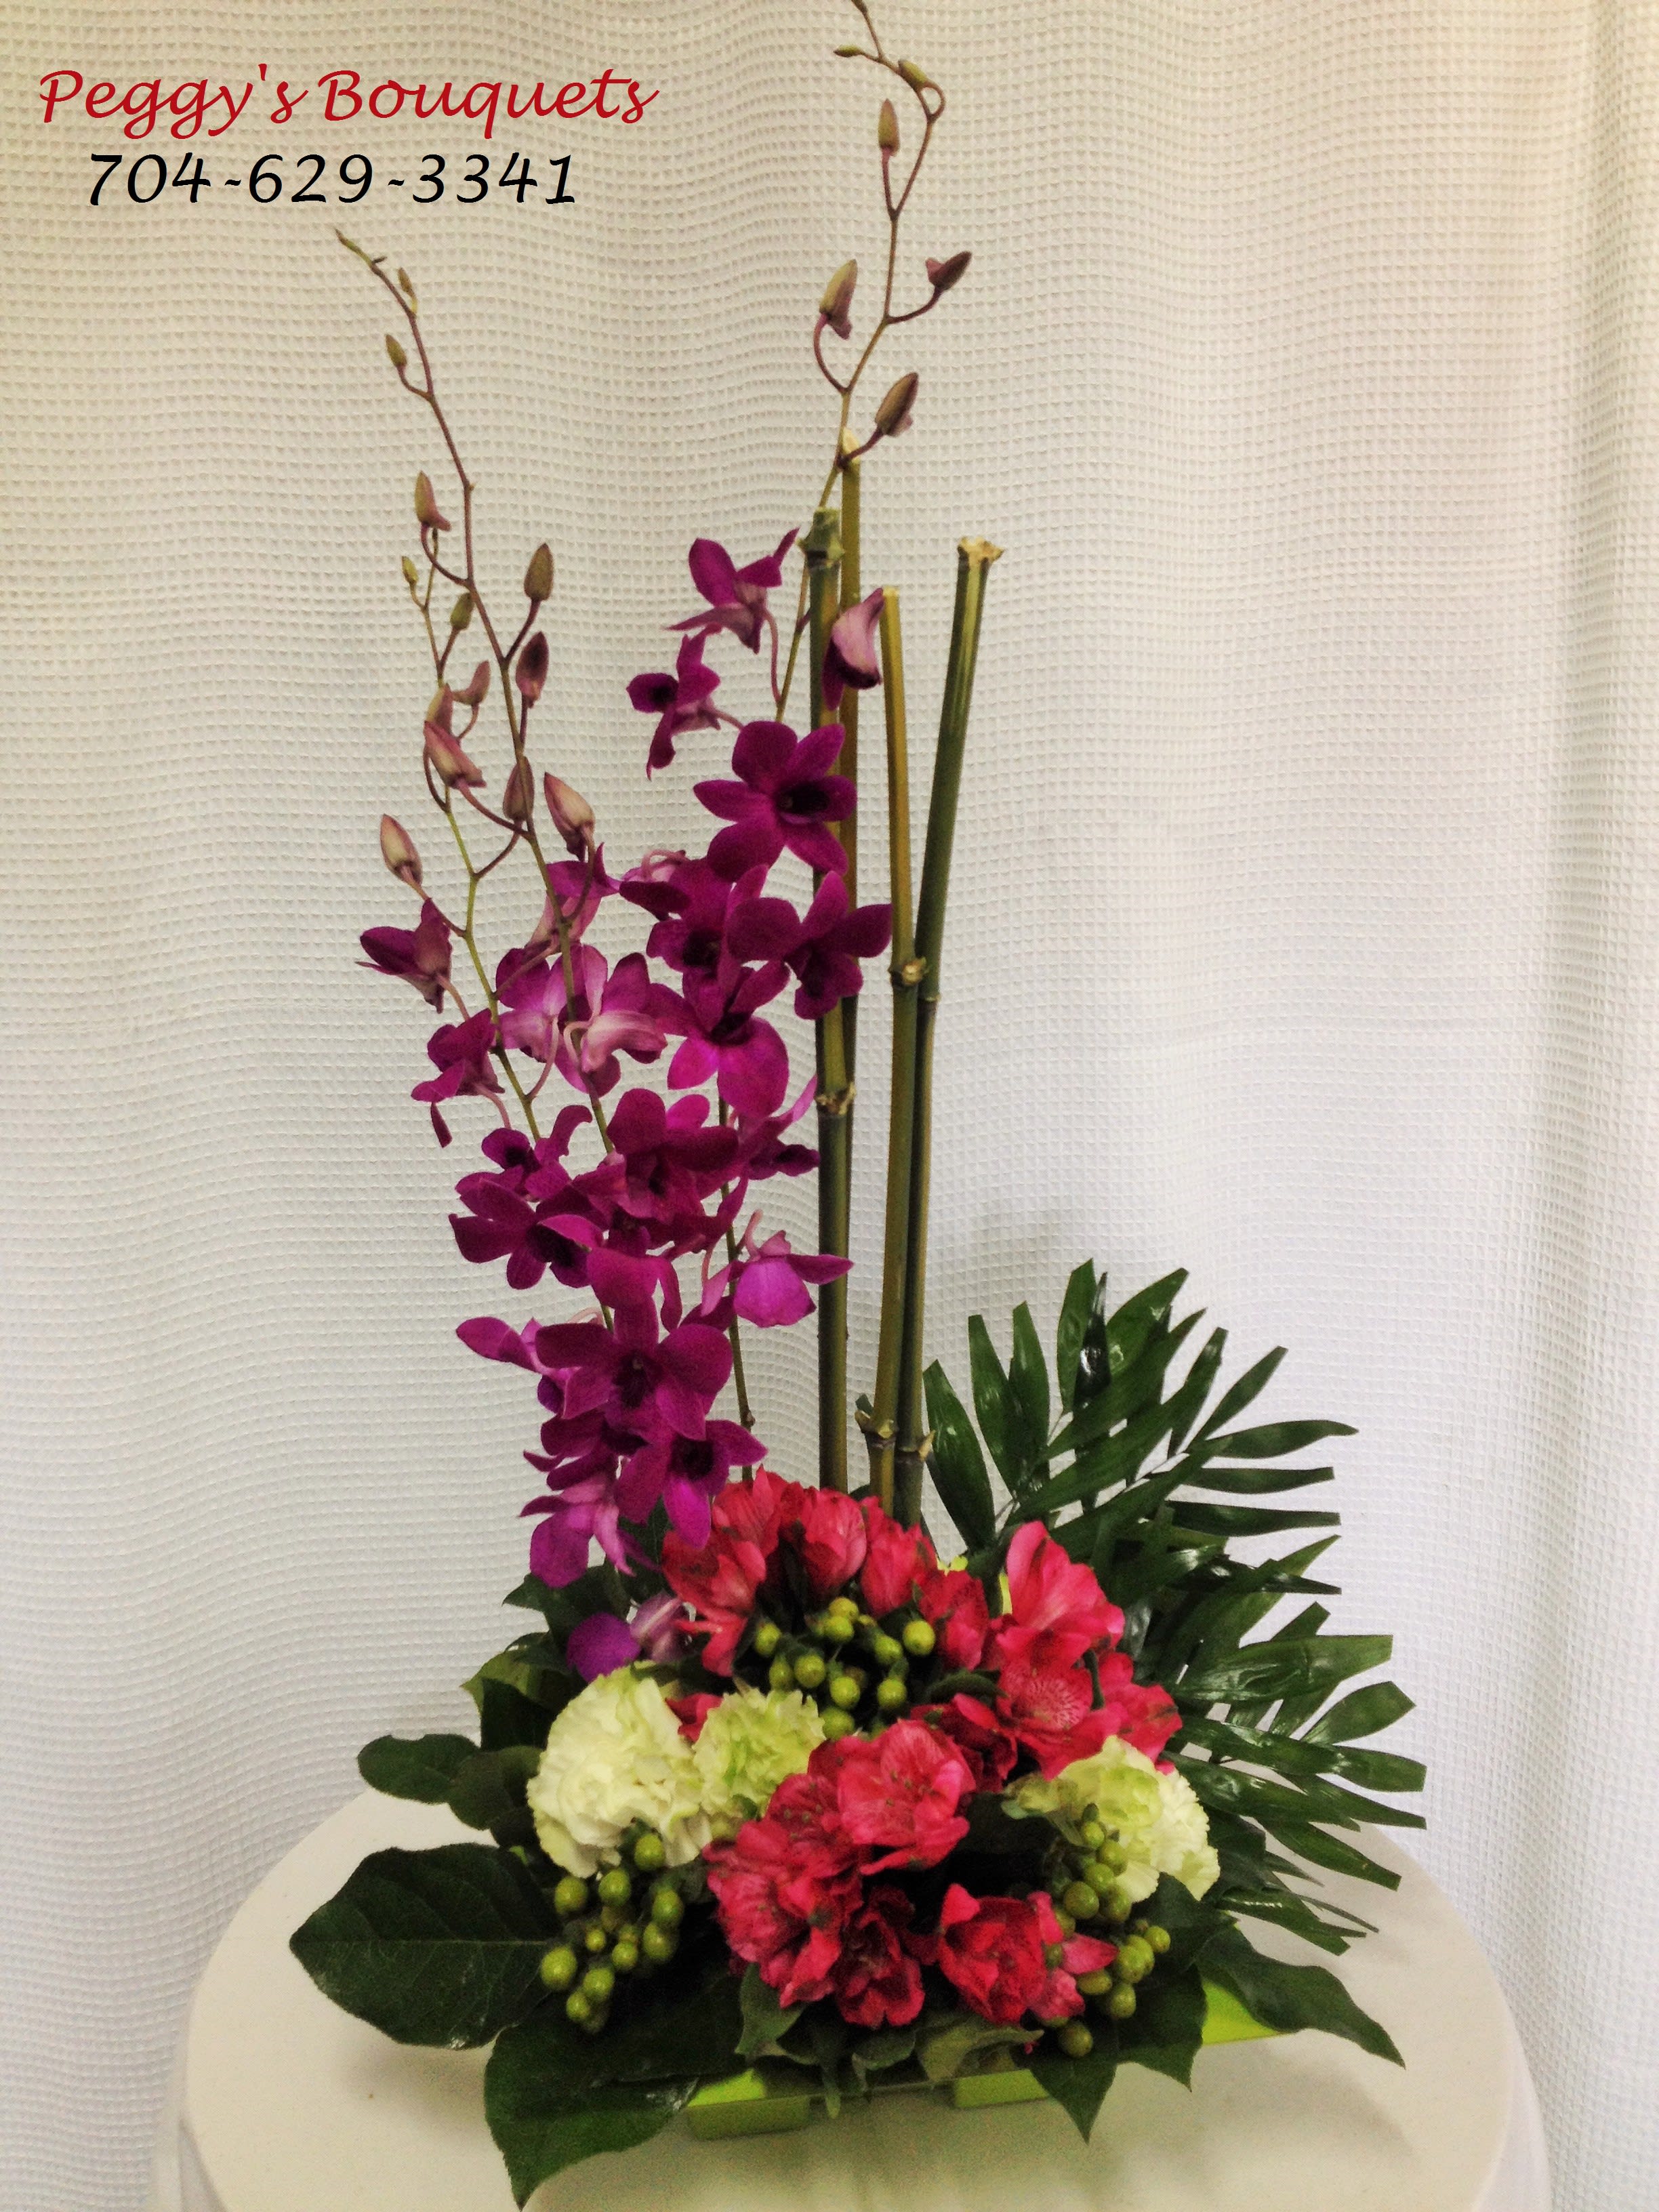 Orchid Delight - Orchids, altromeria, hypericum berries and more make this arrangement perfect for any occasion. Colors may vary. This is available year round. 